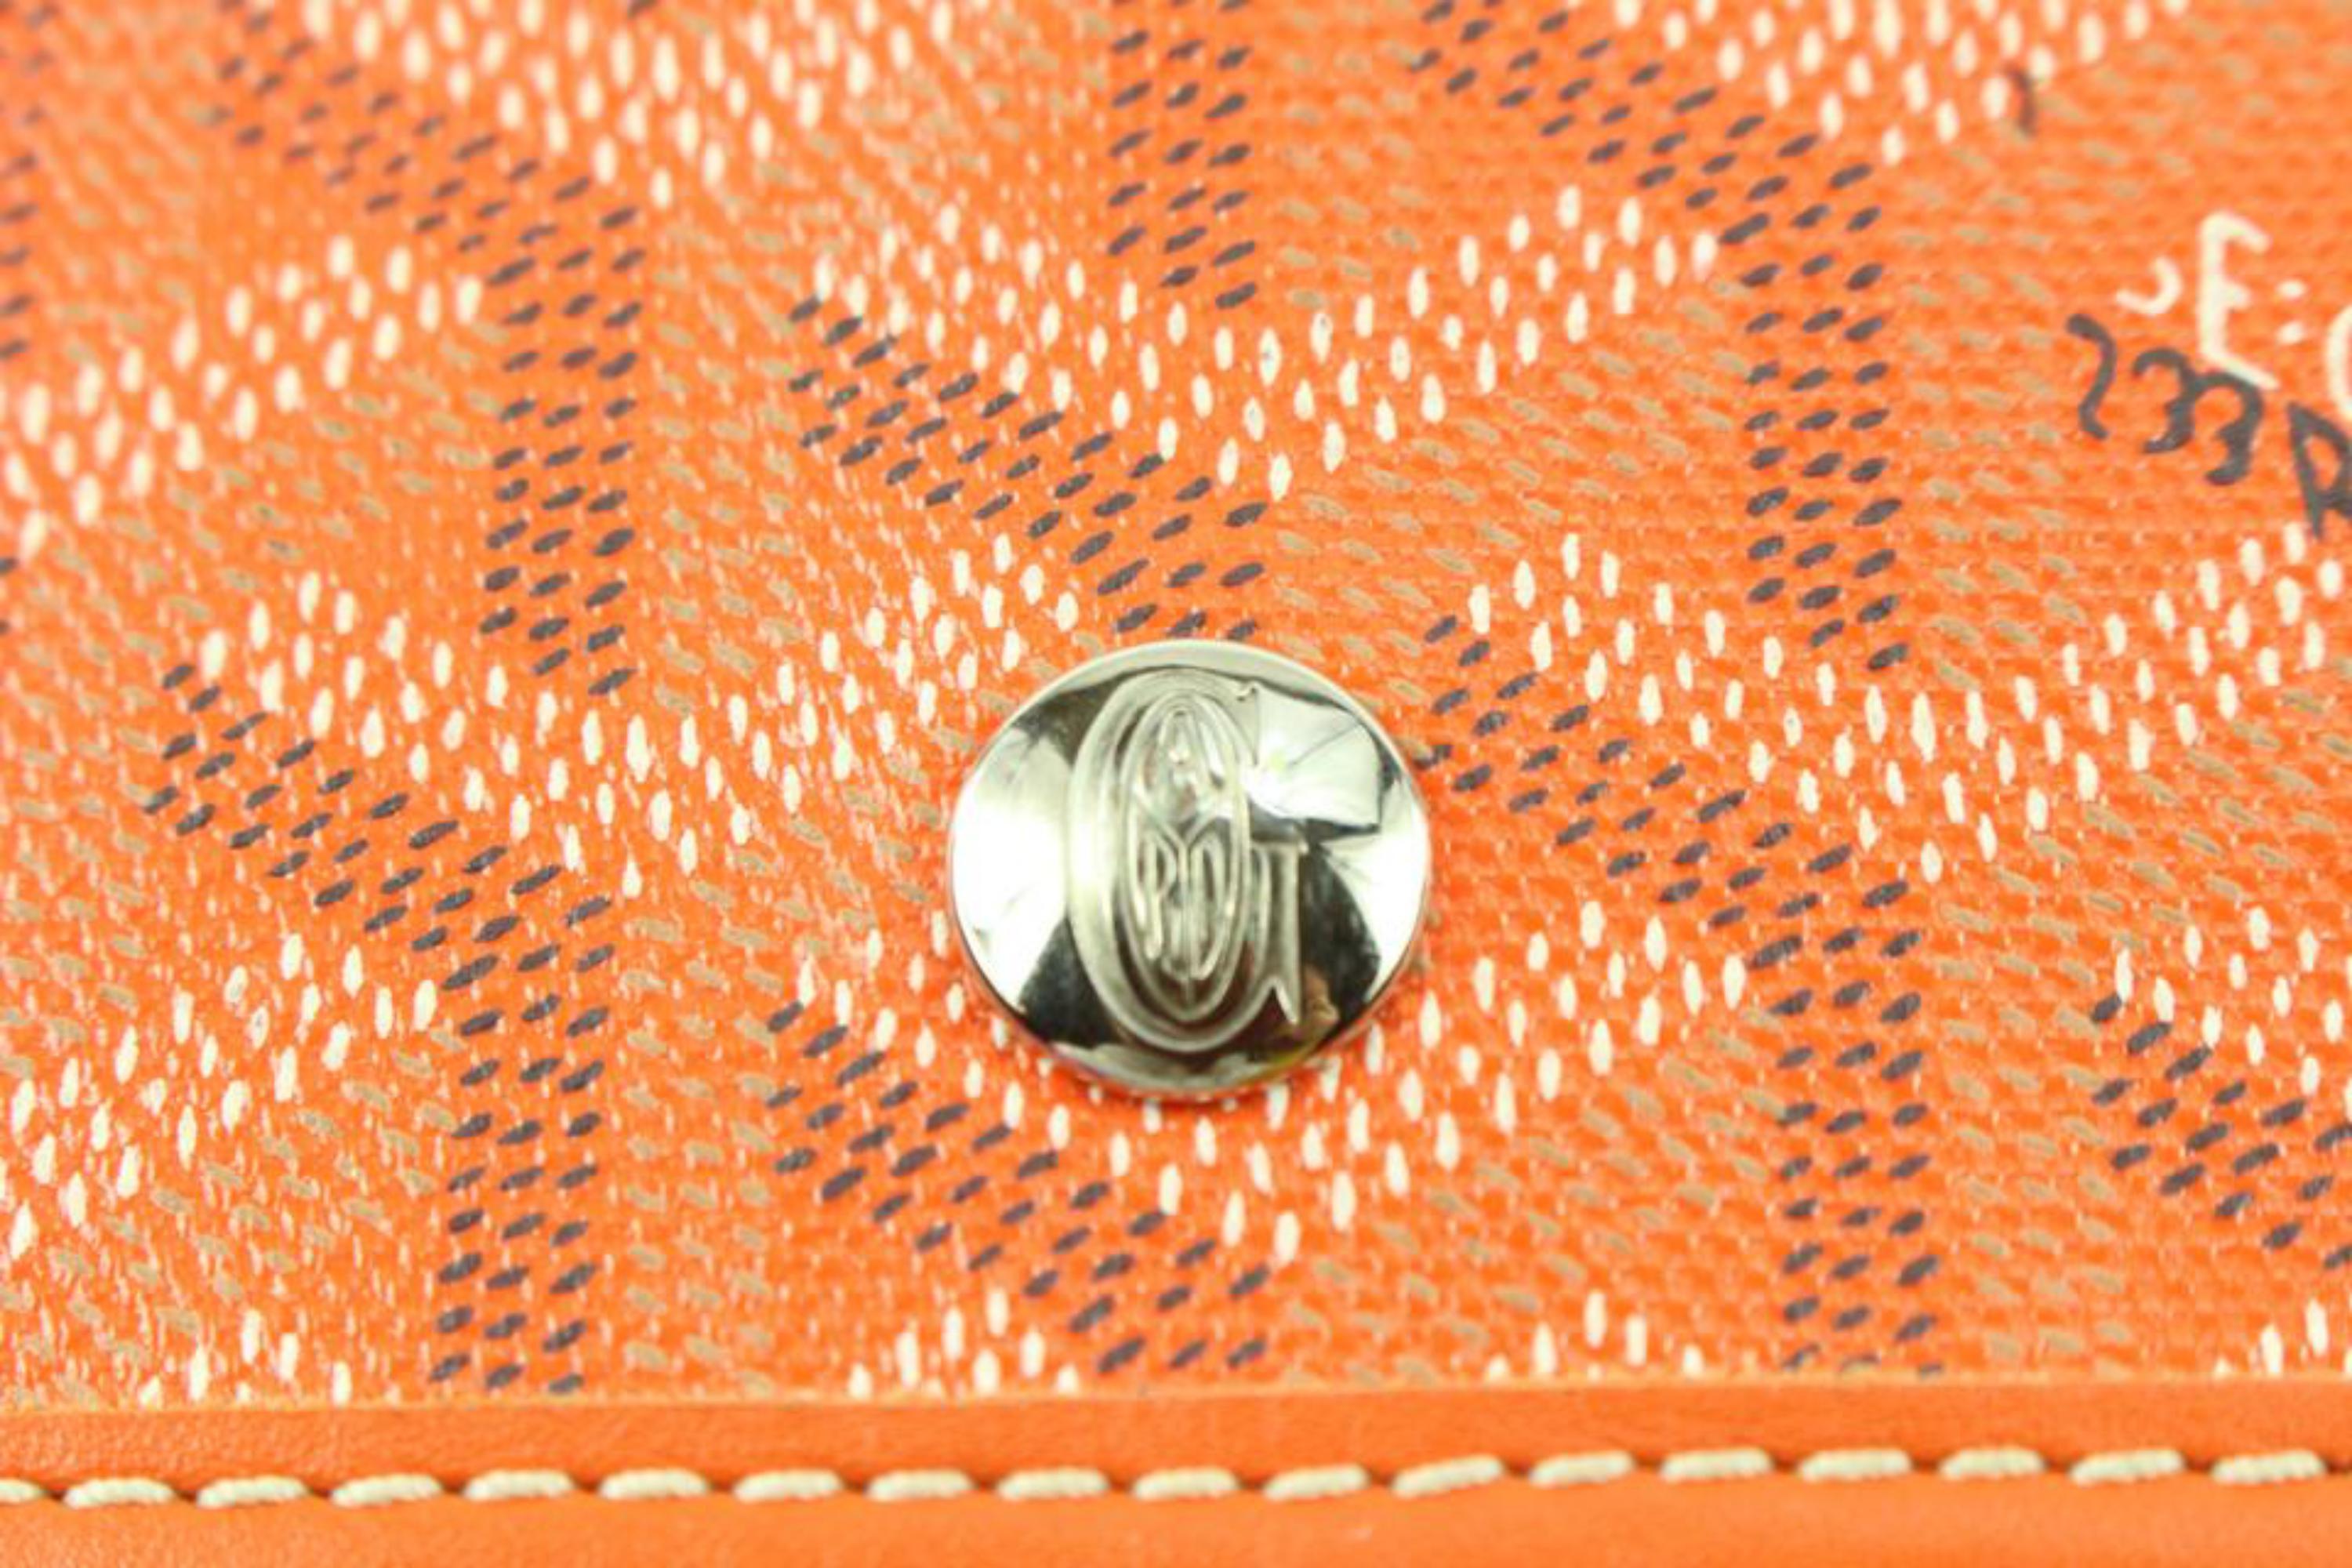 Goyard Rare Orange Chevron St Louis PM Tote with Pouch 118gy30
Date Code/Serial Number: SAR 120121
Made In: France
Measurements: Length:  18.5